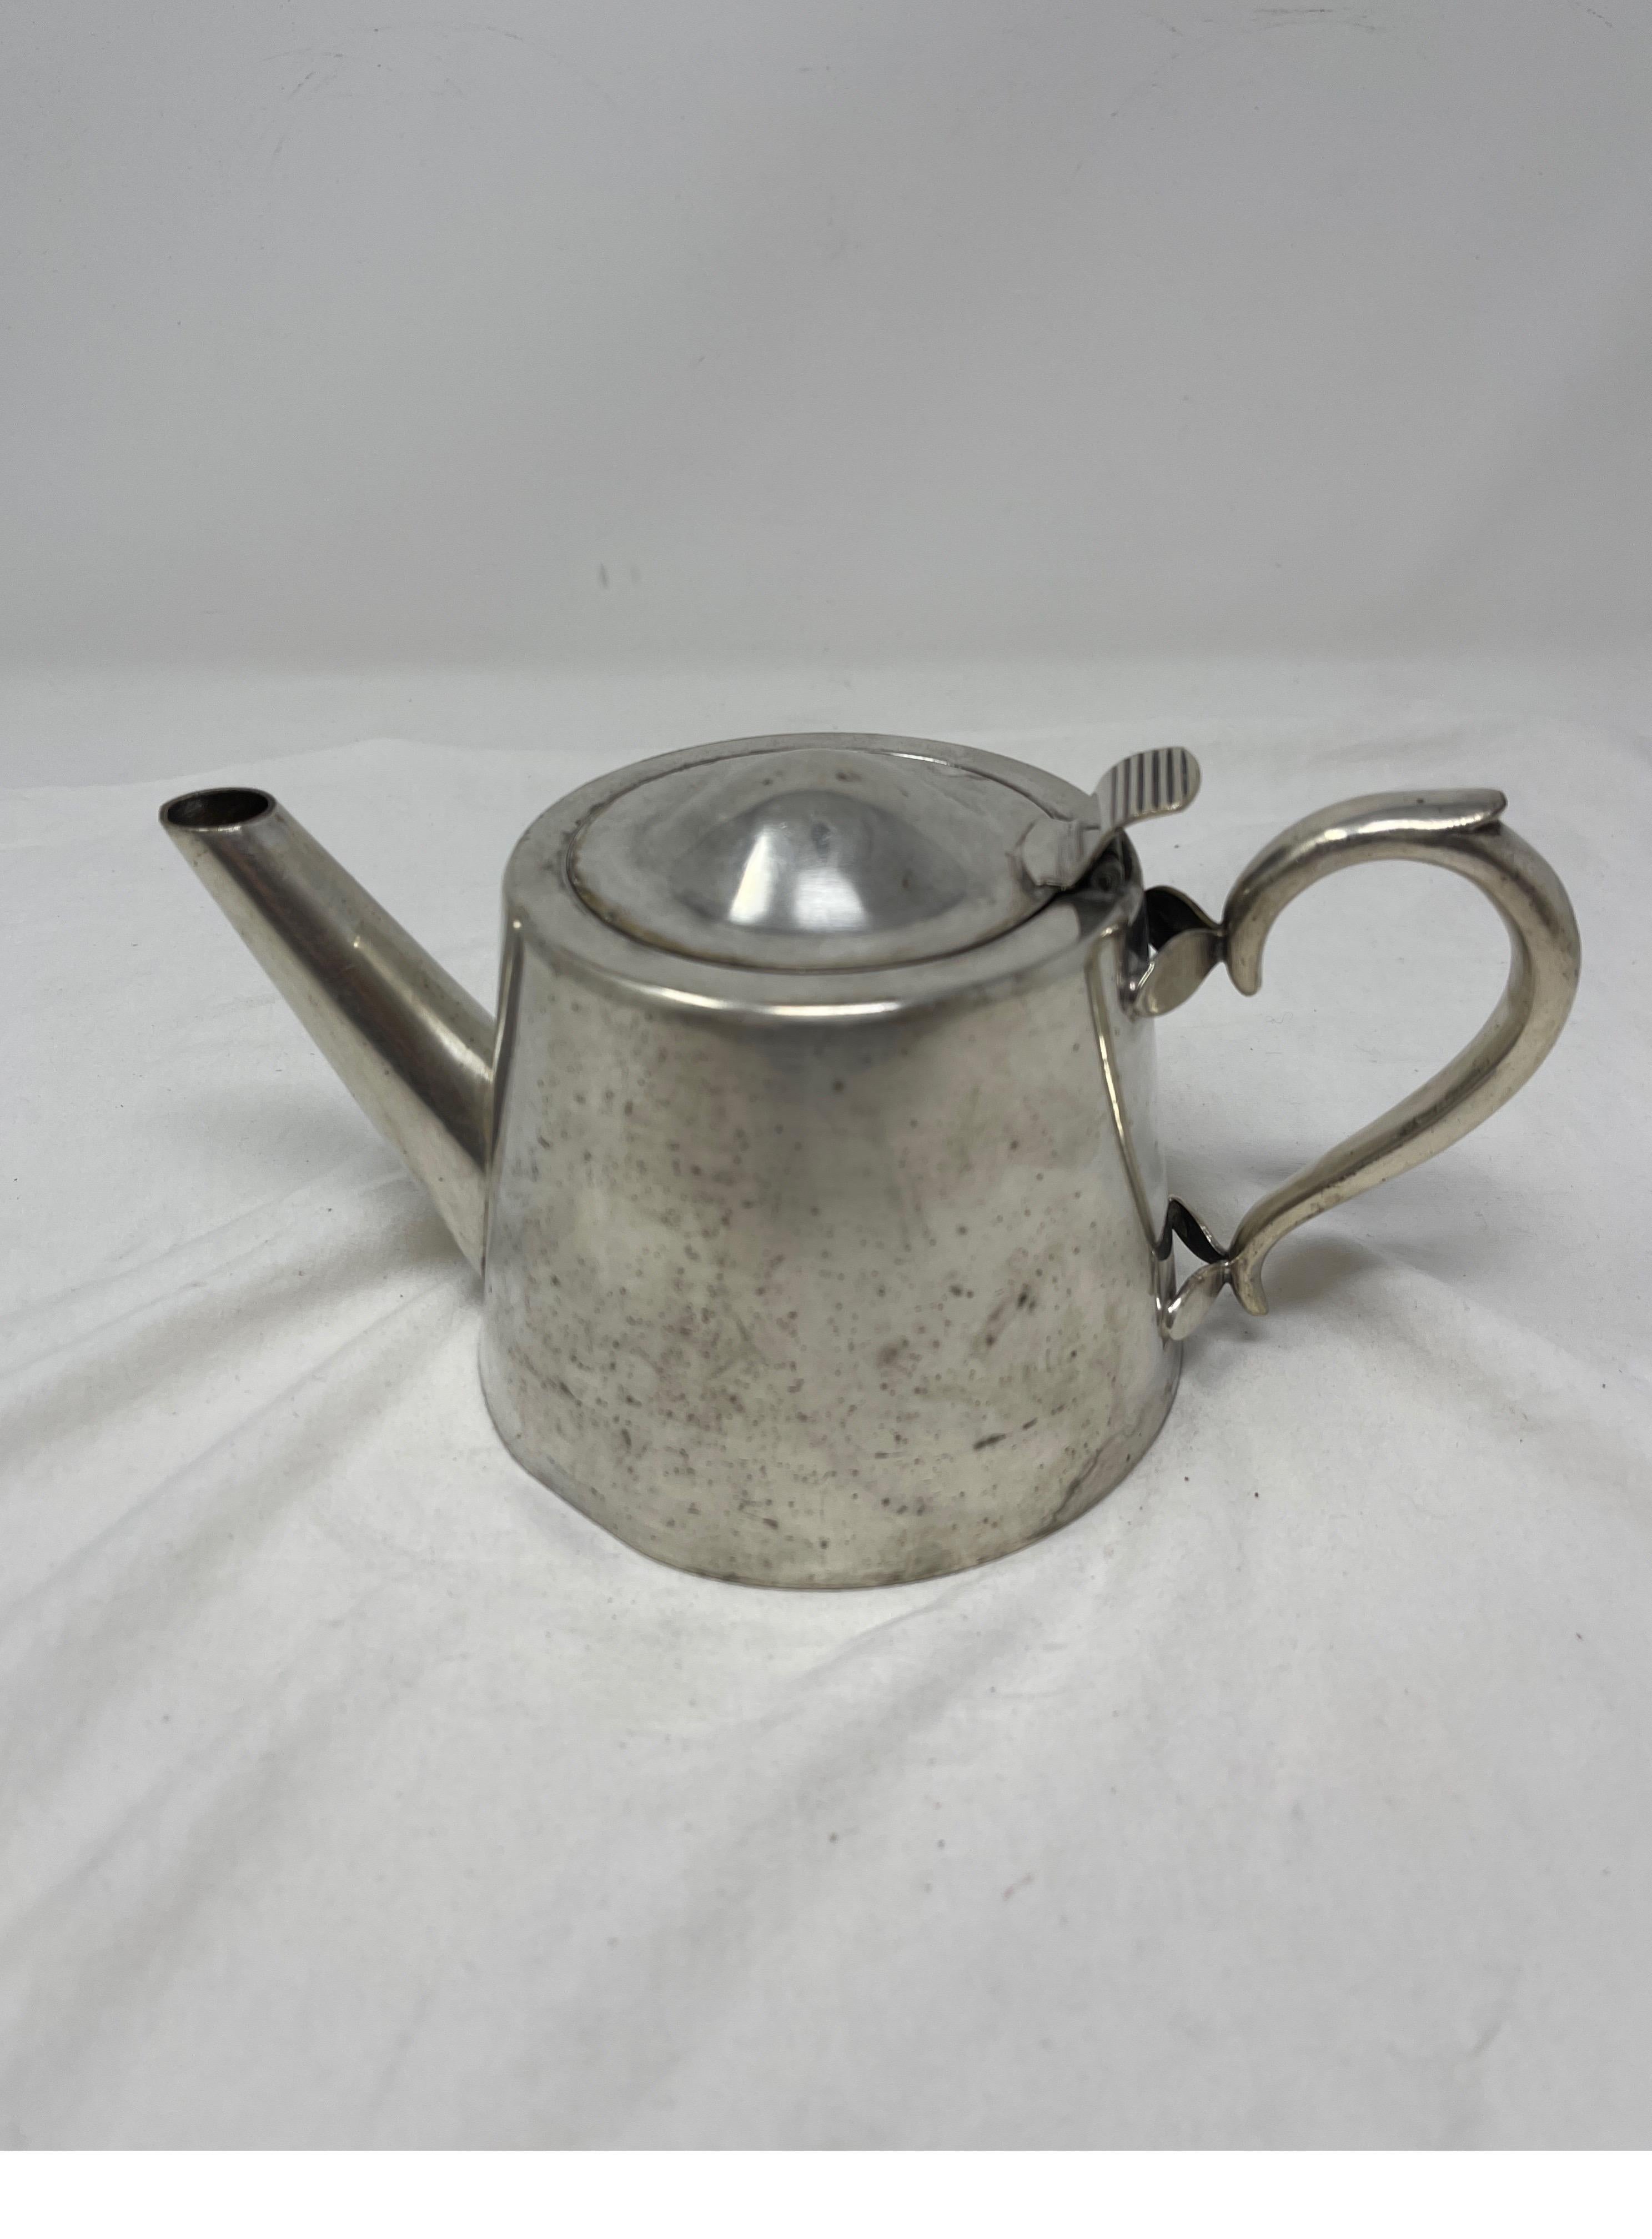 Enjoy this charming 19th century tea pot from France while entertaining or enjoying a cup of tea for yourself. 
Measures: 4